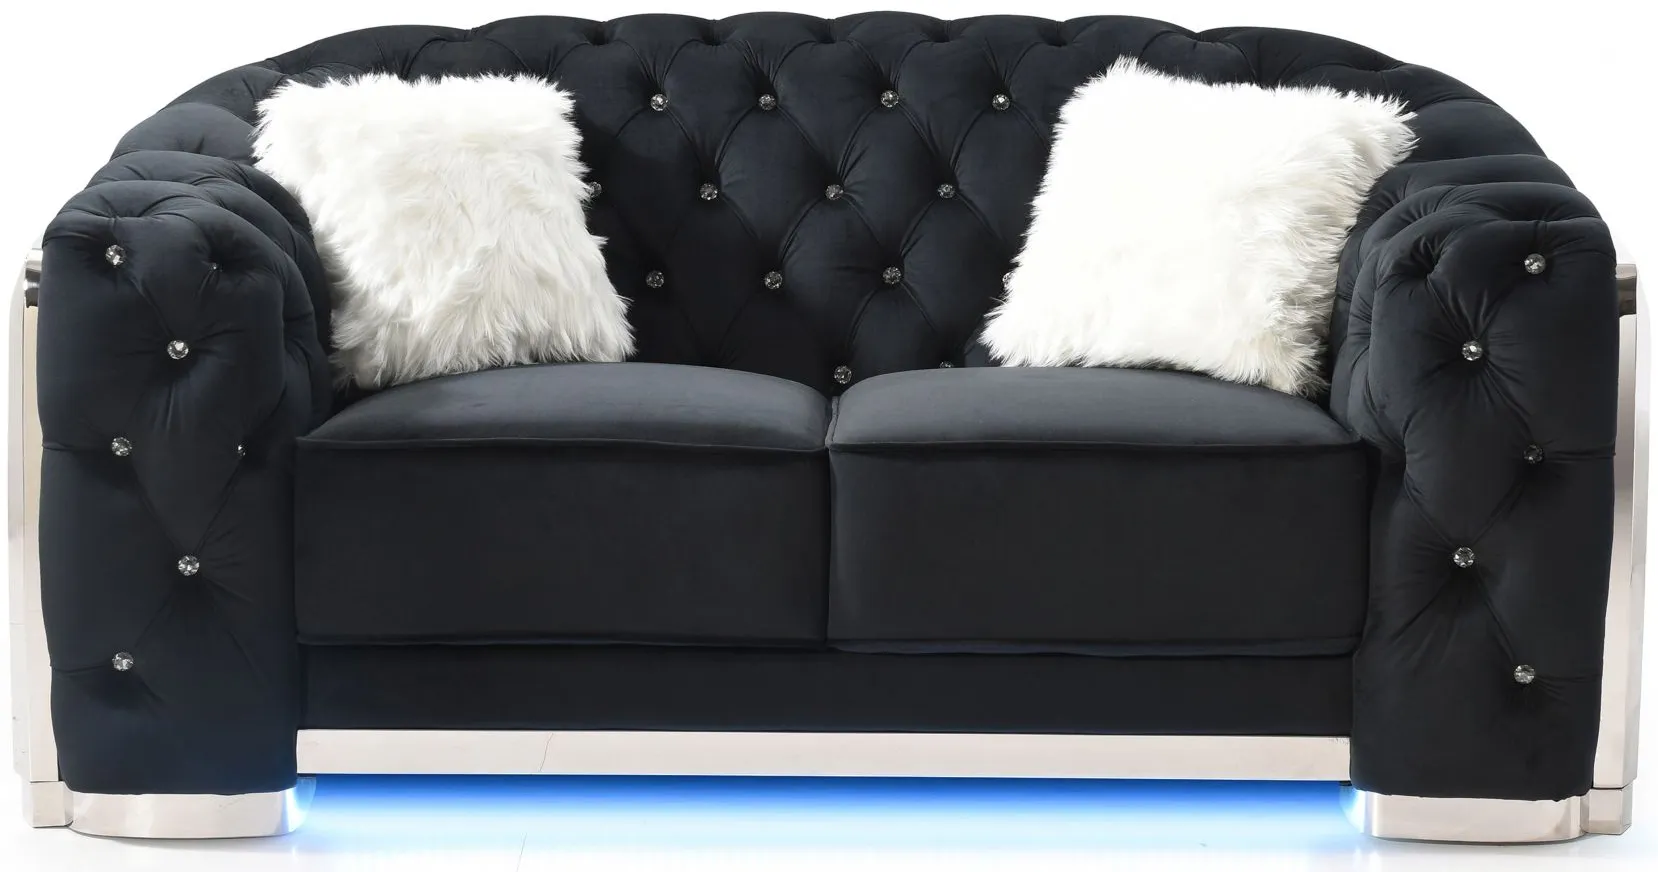 Sapphire Loveseat in Black by Glory Furniture